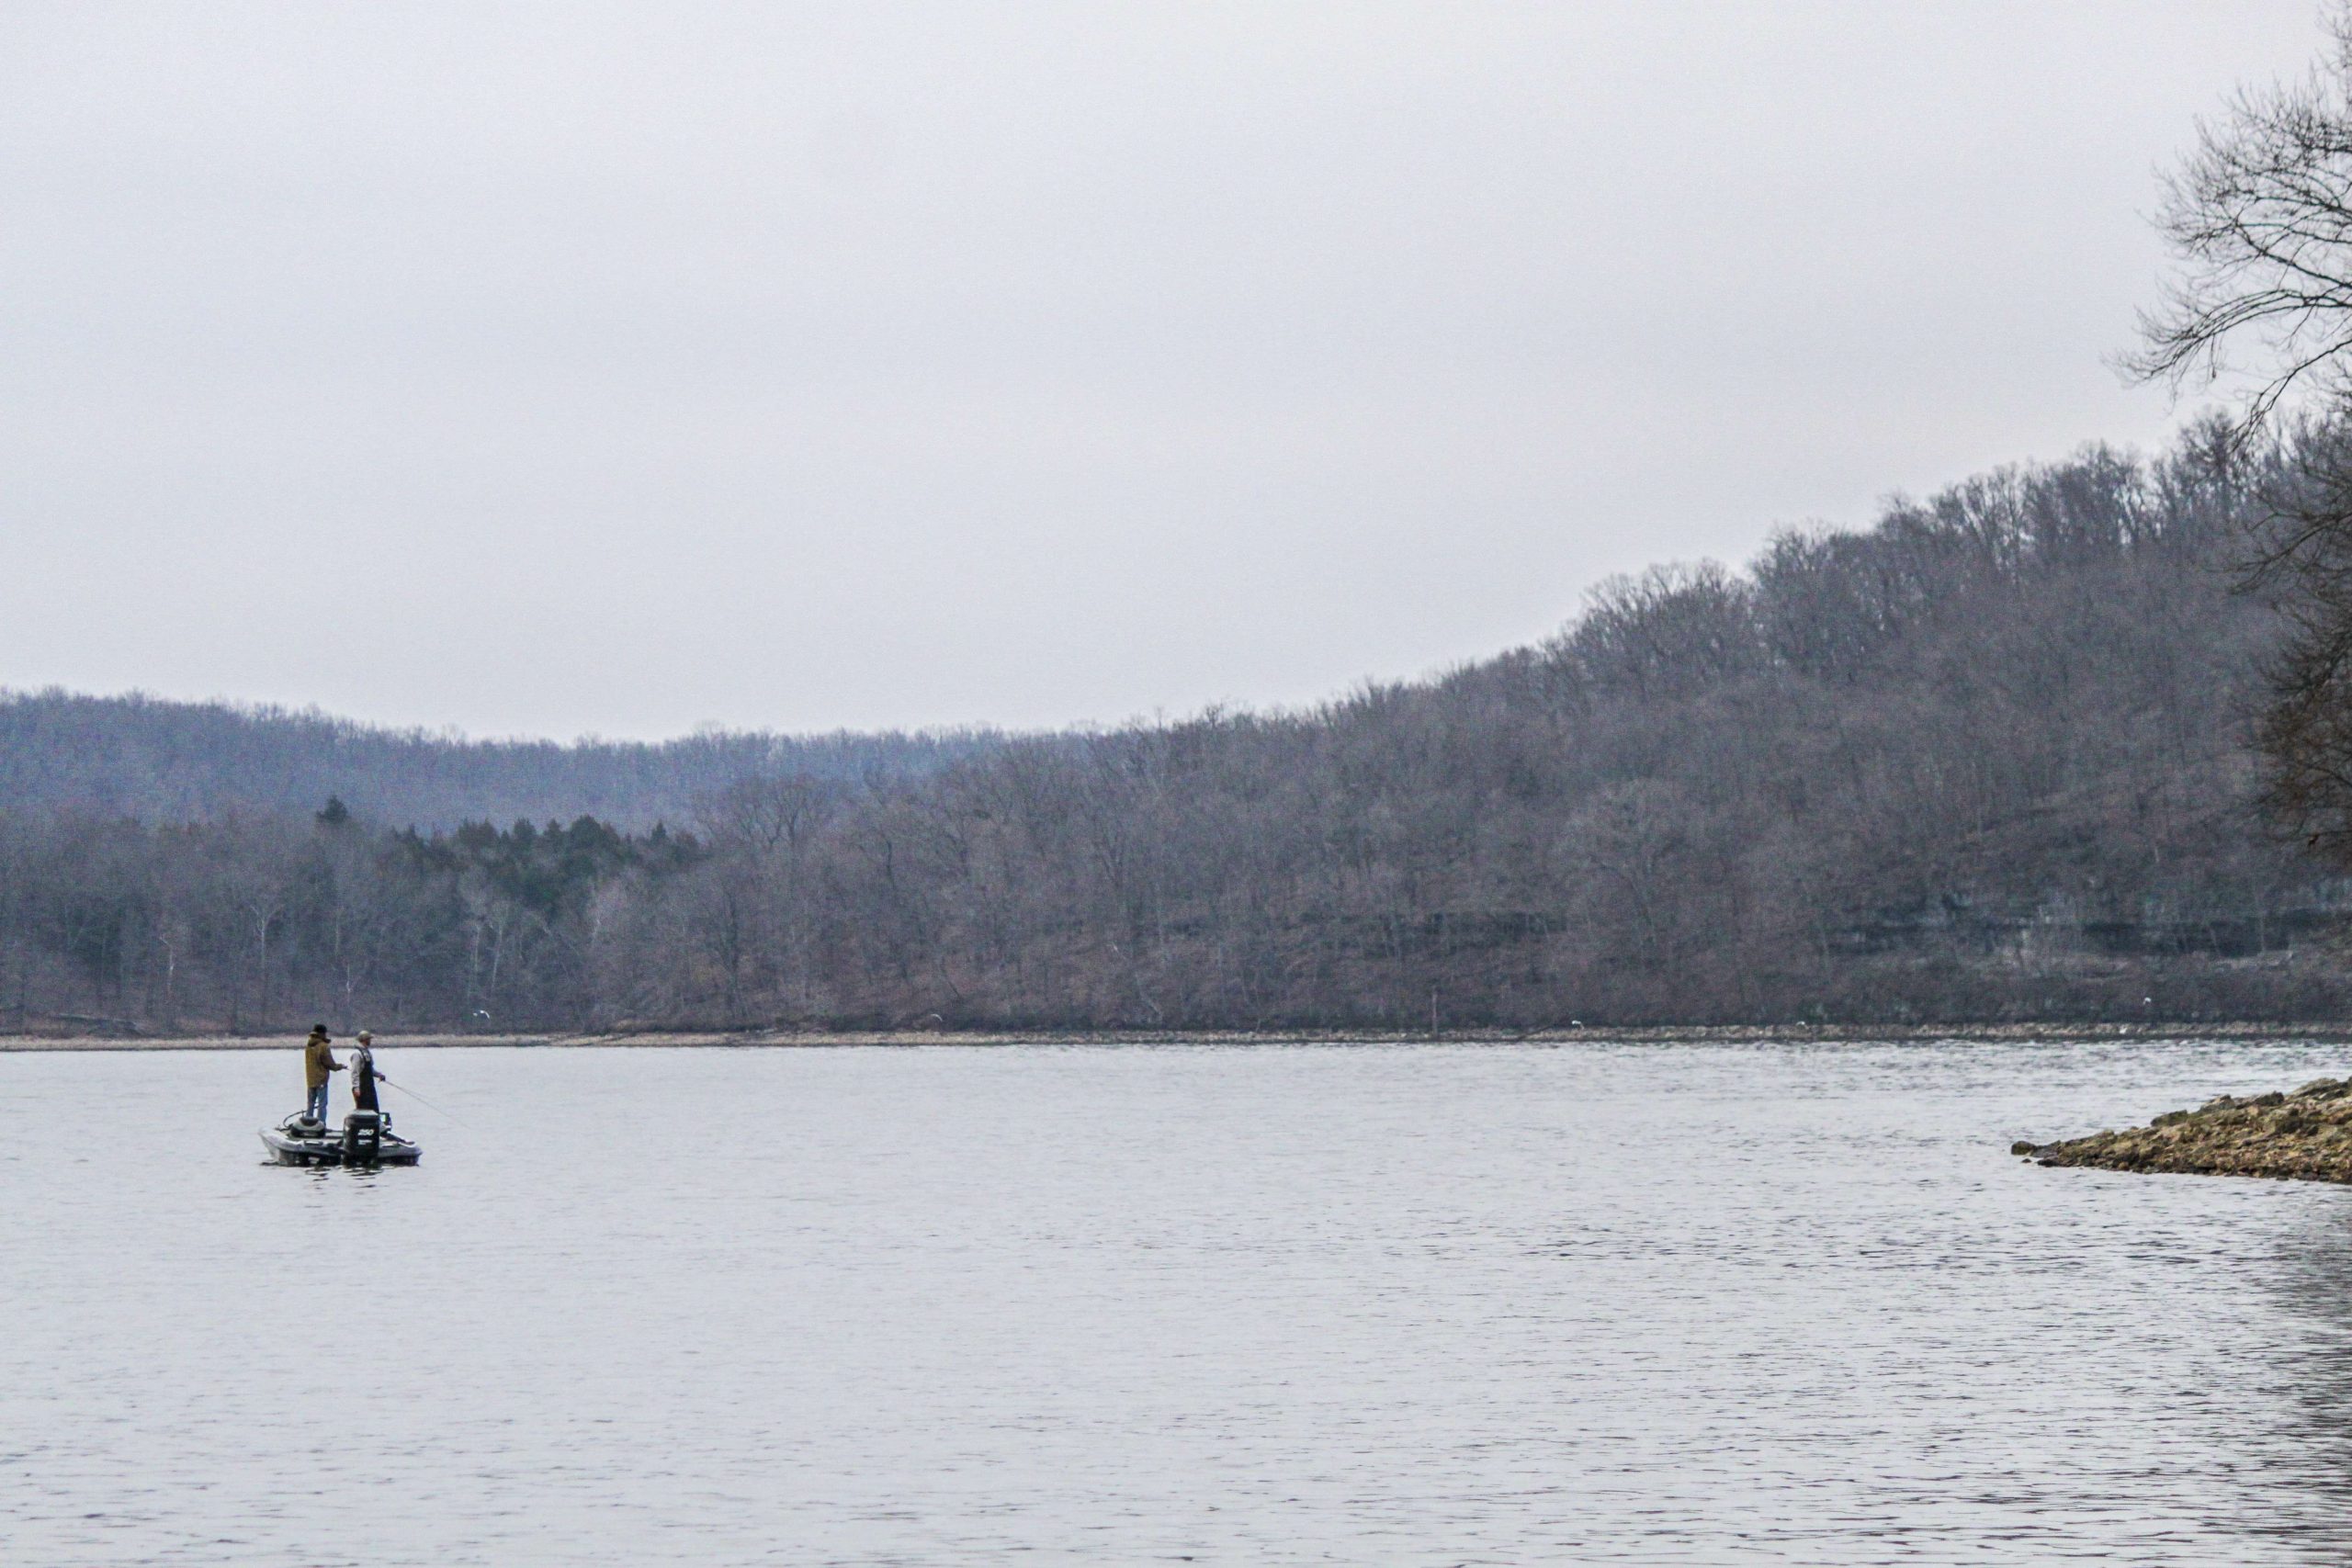 The Lake of the Ozarks is a 54,000-acre lake in central Missouri. 